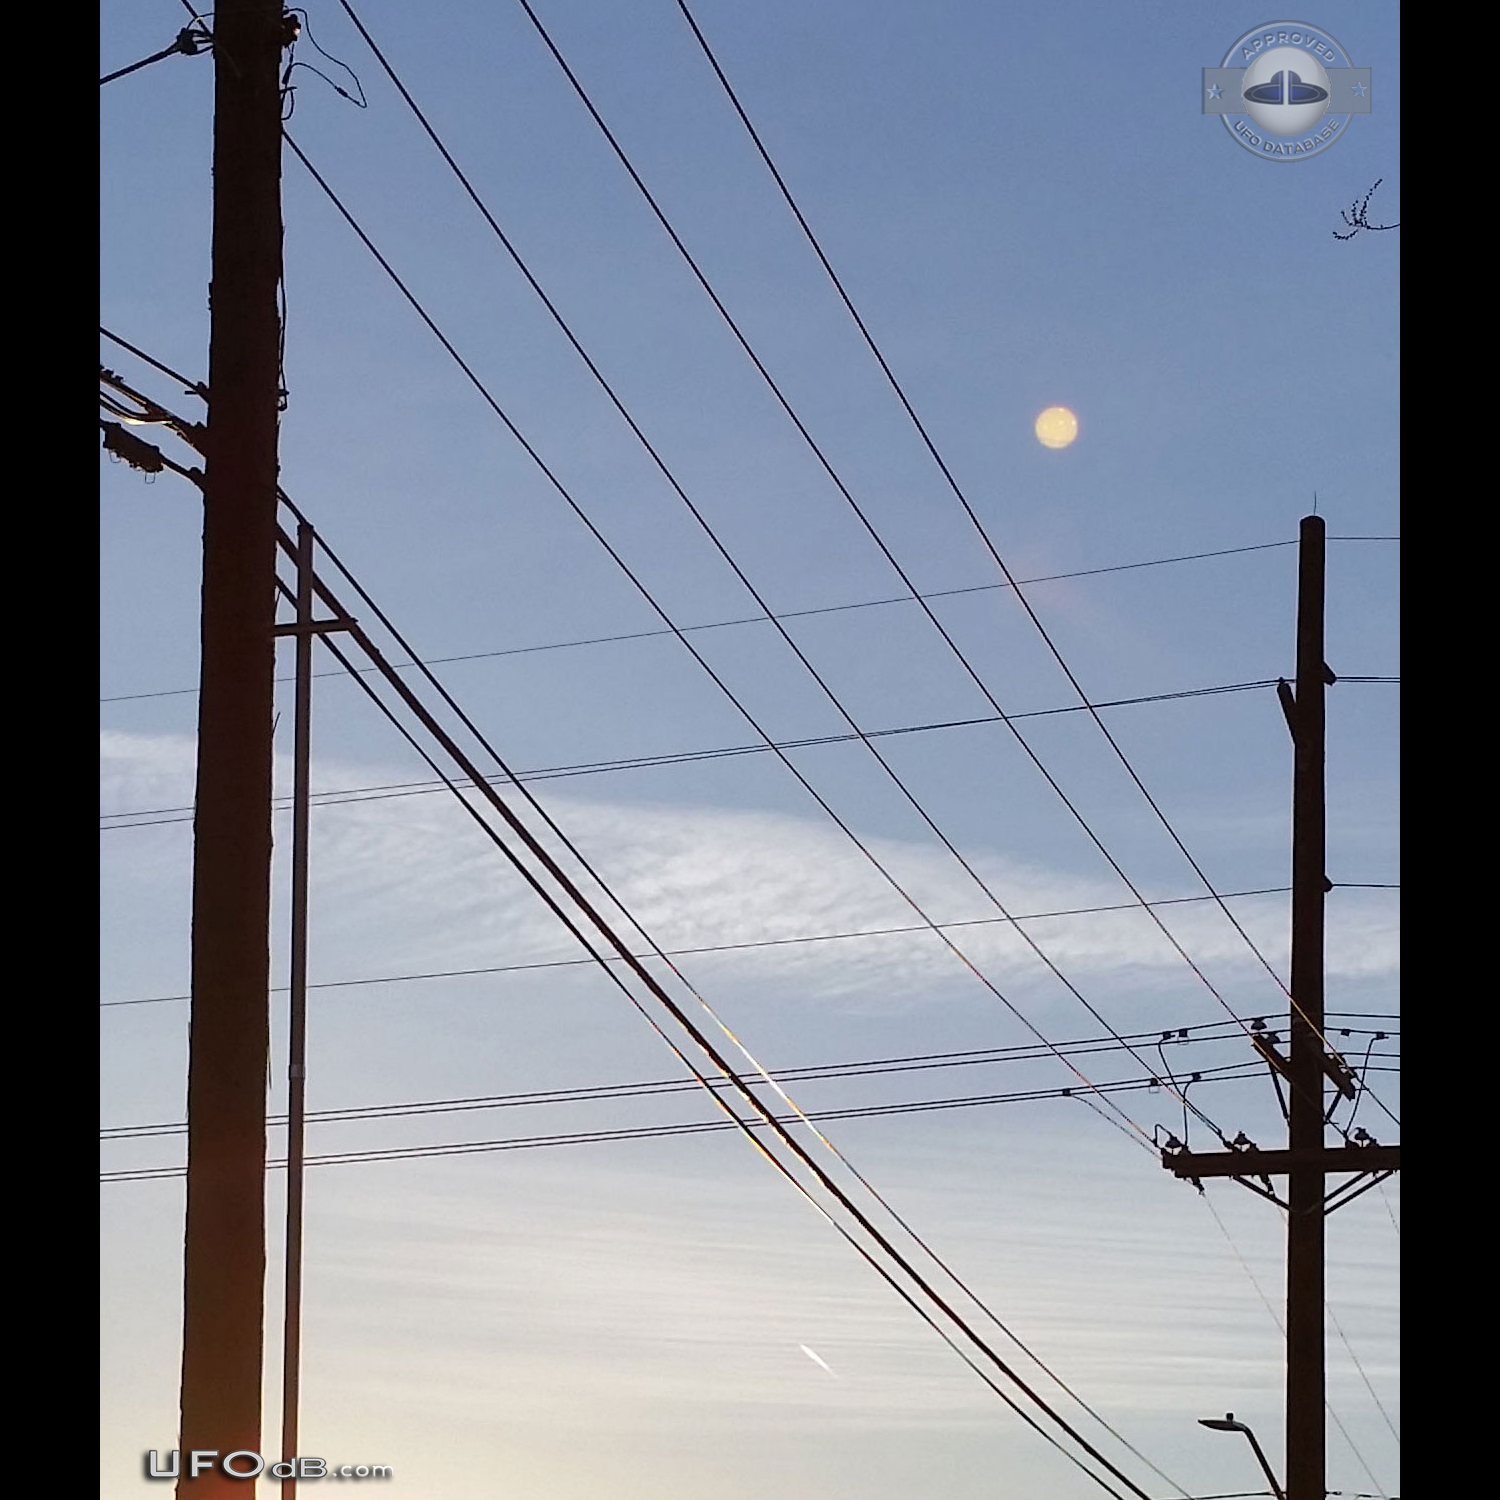 After feeling ET presence Orb UFO seen on Picture Salt Lake City 2015 UFO Picture #638-3